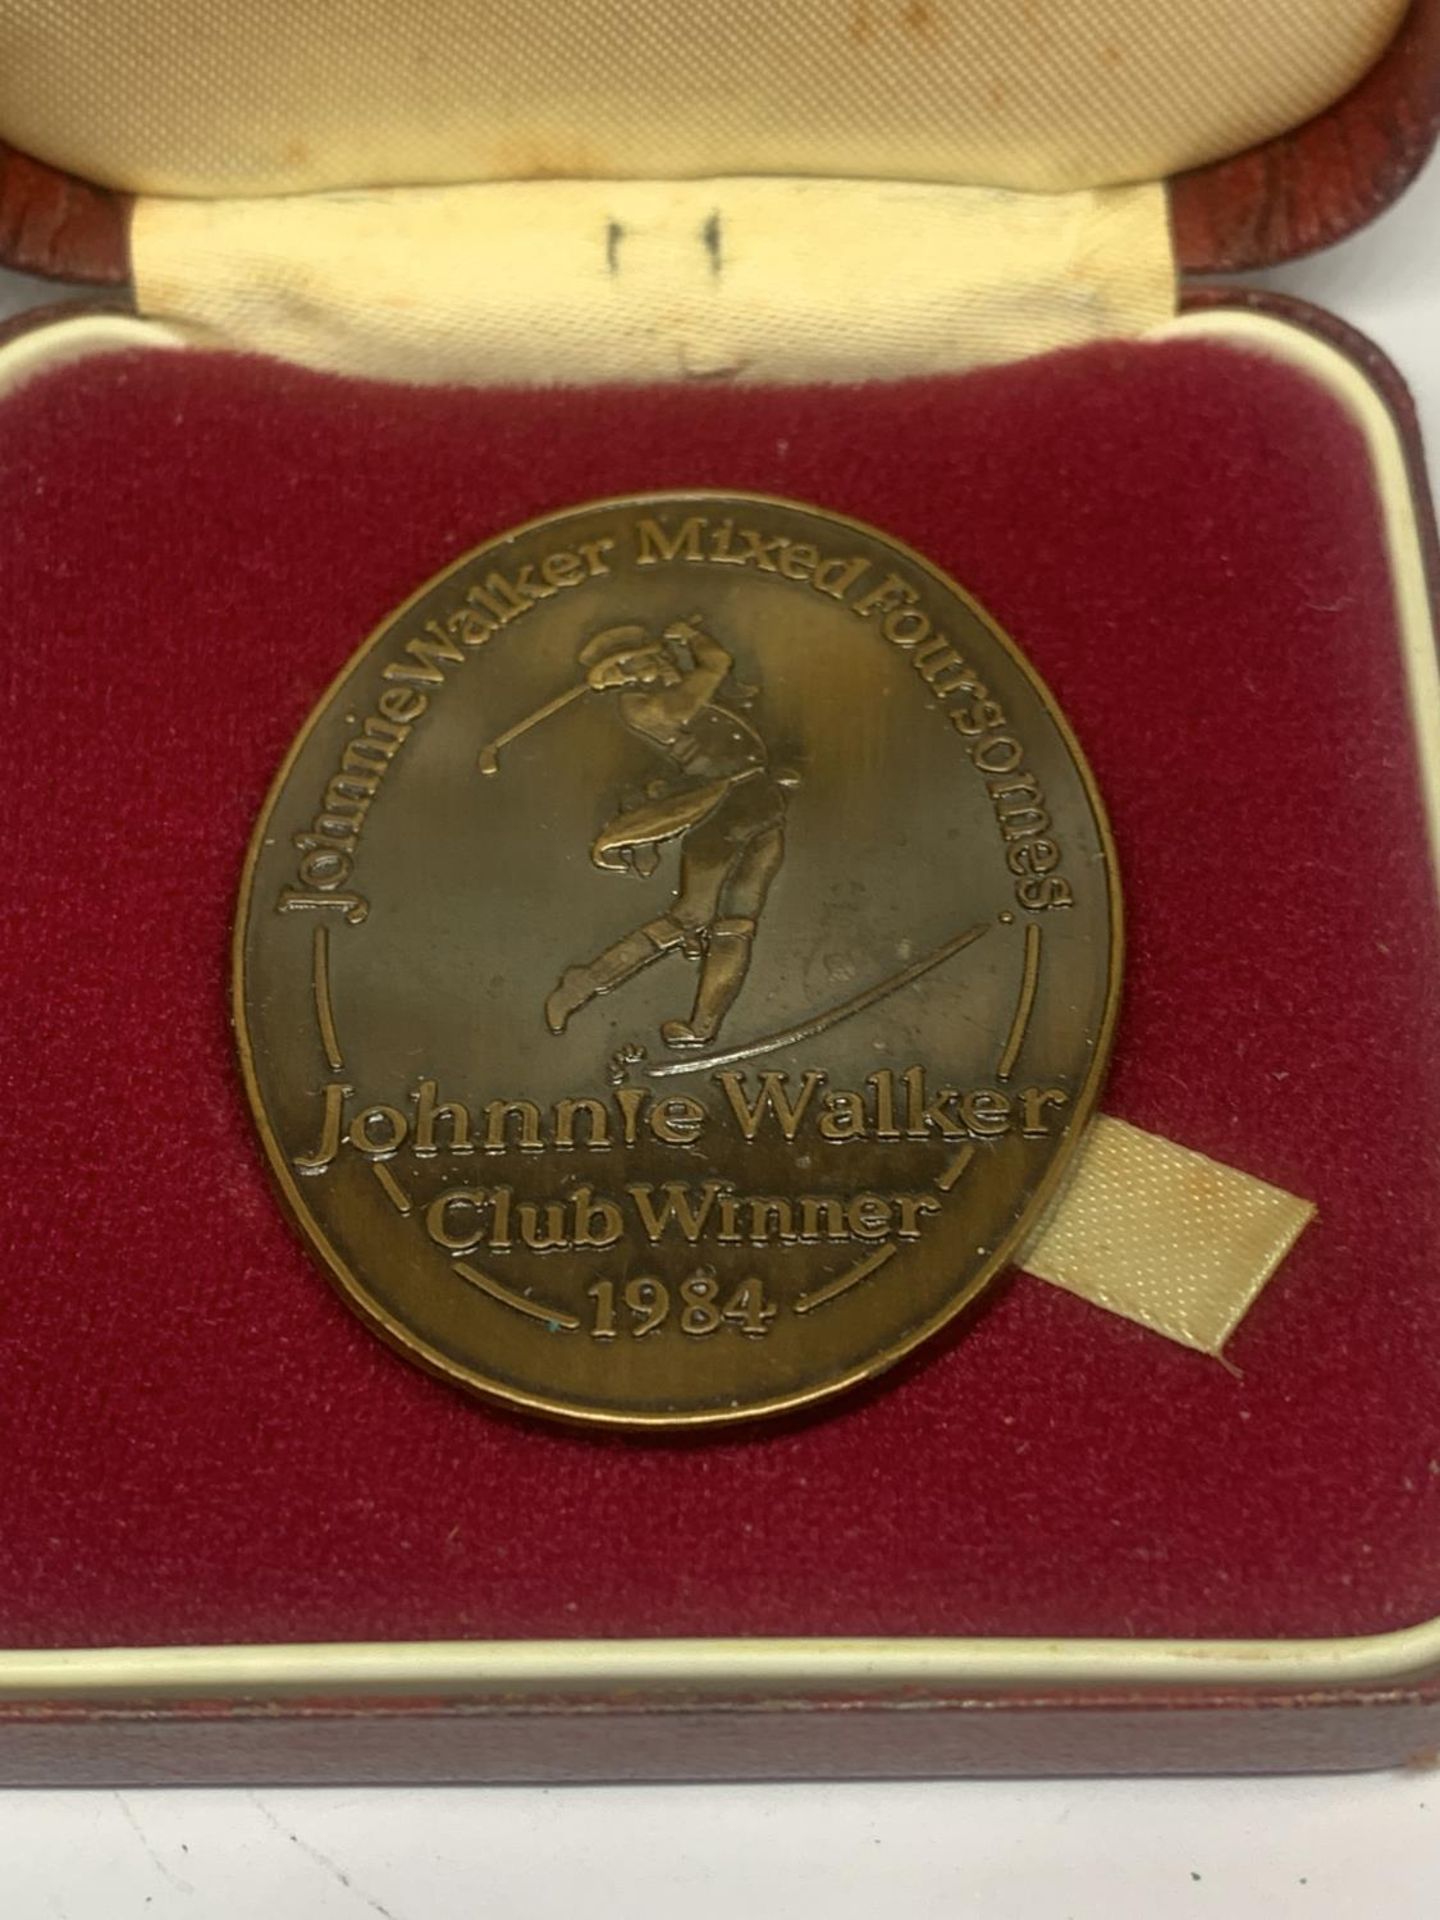 TWO BOXED MEDALS ONE LORDS 1985 AND ONE 1984 JOHNNIE WALKER CLUB WINNER - Image 2 of 3